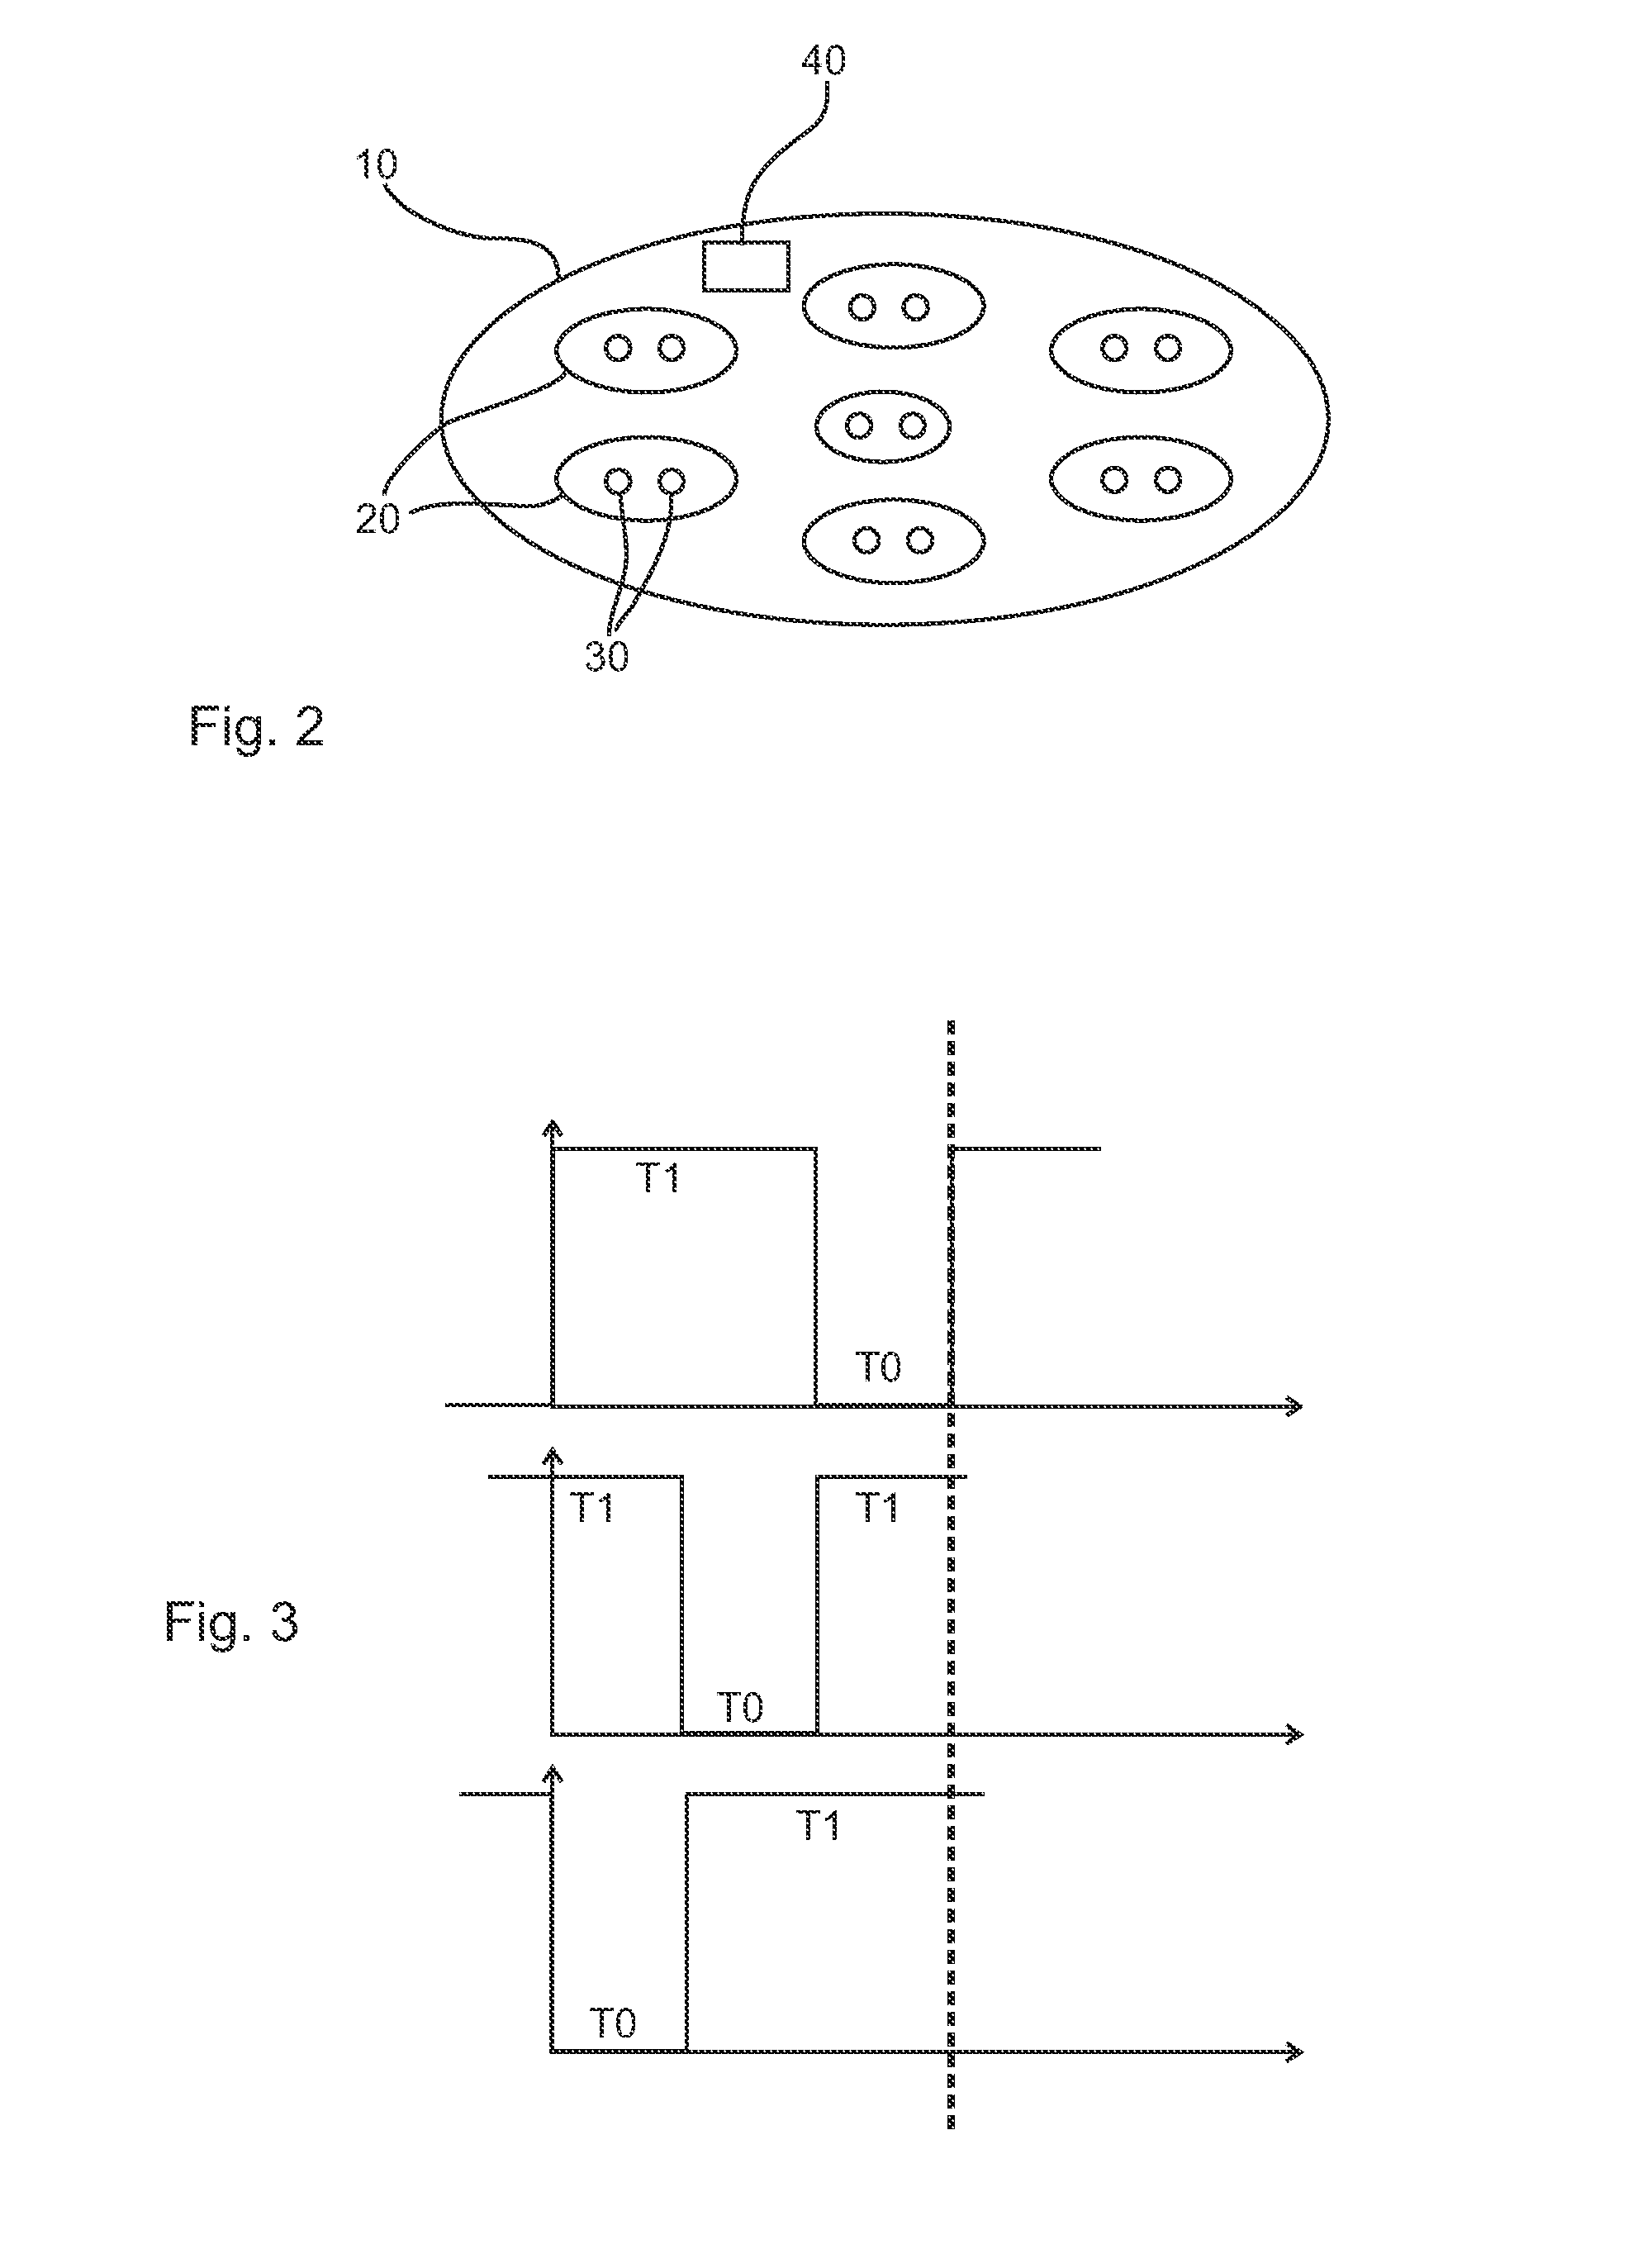 Process for the detection of optical signals